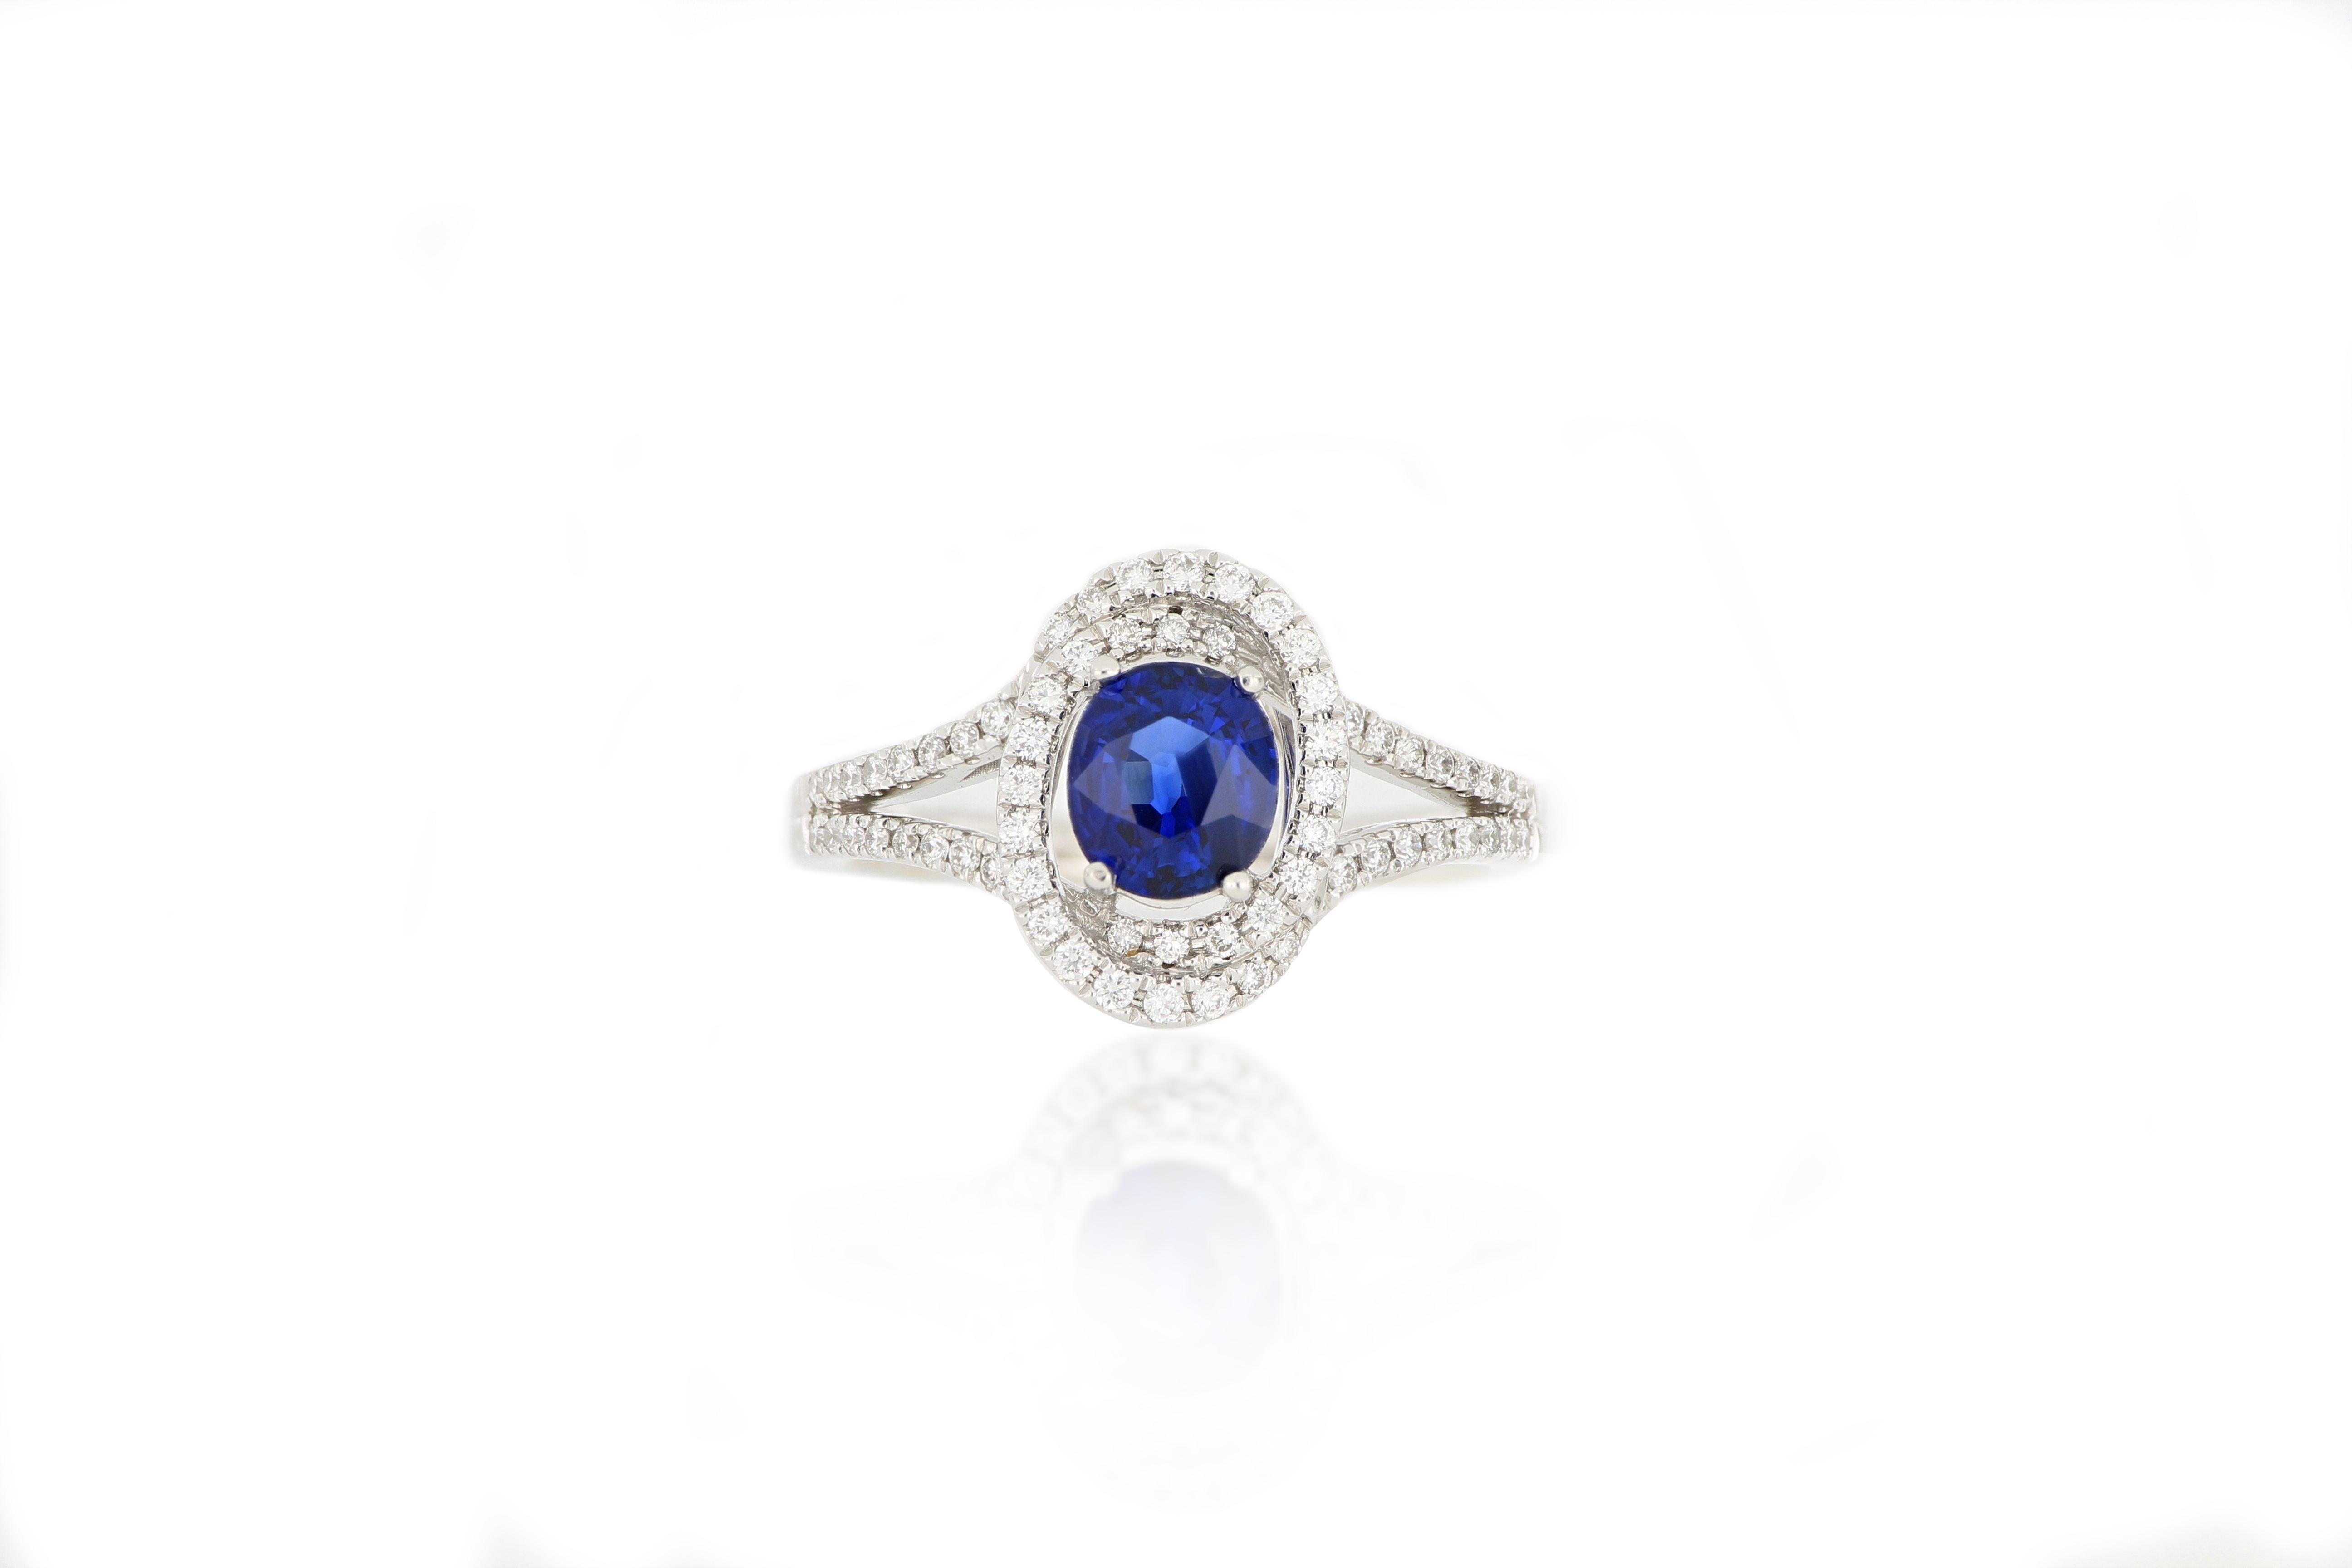 A beautiful sapphire and diamond ring. A natural sapphire weighing 1.27cts, surrounded by brilliant-cut diamonds total weighing 0.31cts extended to the shoulders, mounted in 18 karat white gold.
O’Che 1867 is renowned for its high jewellery